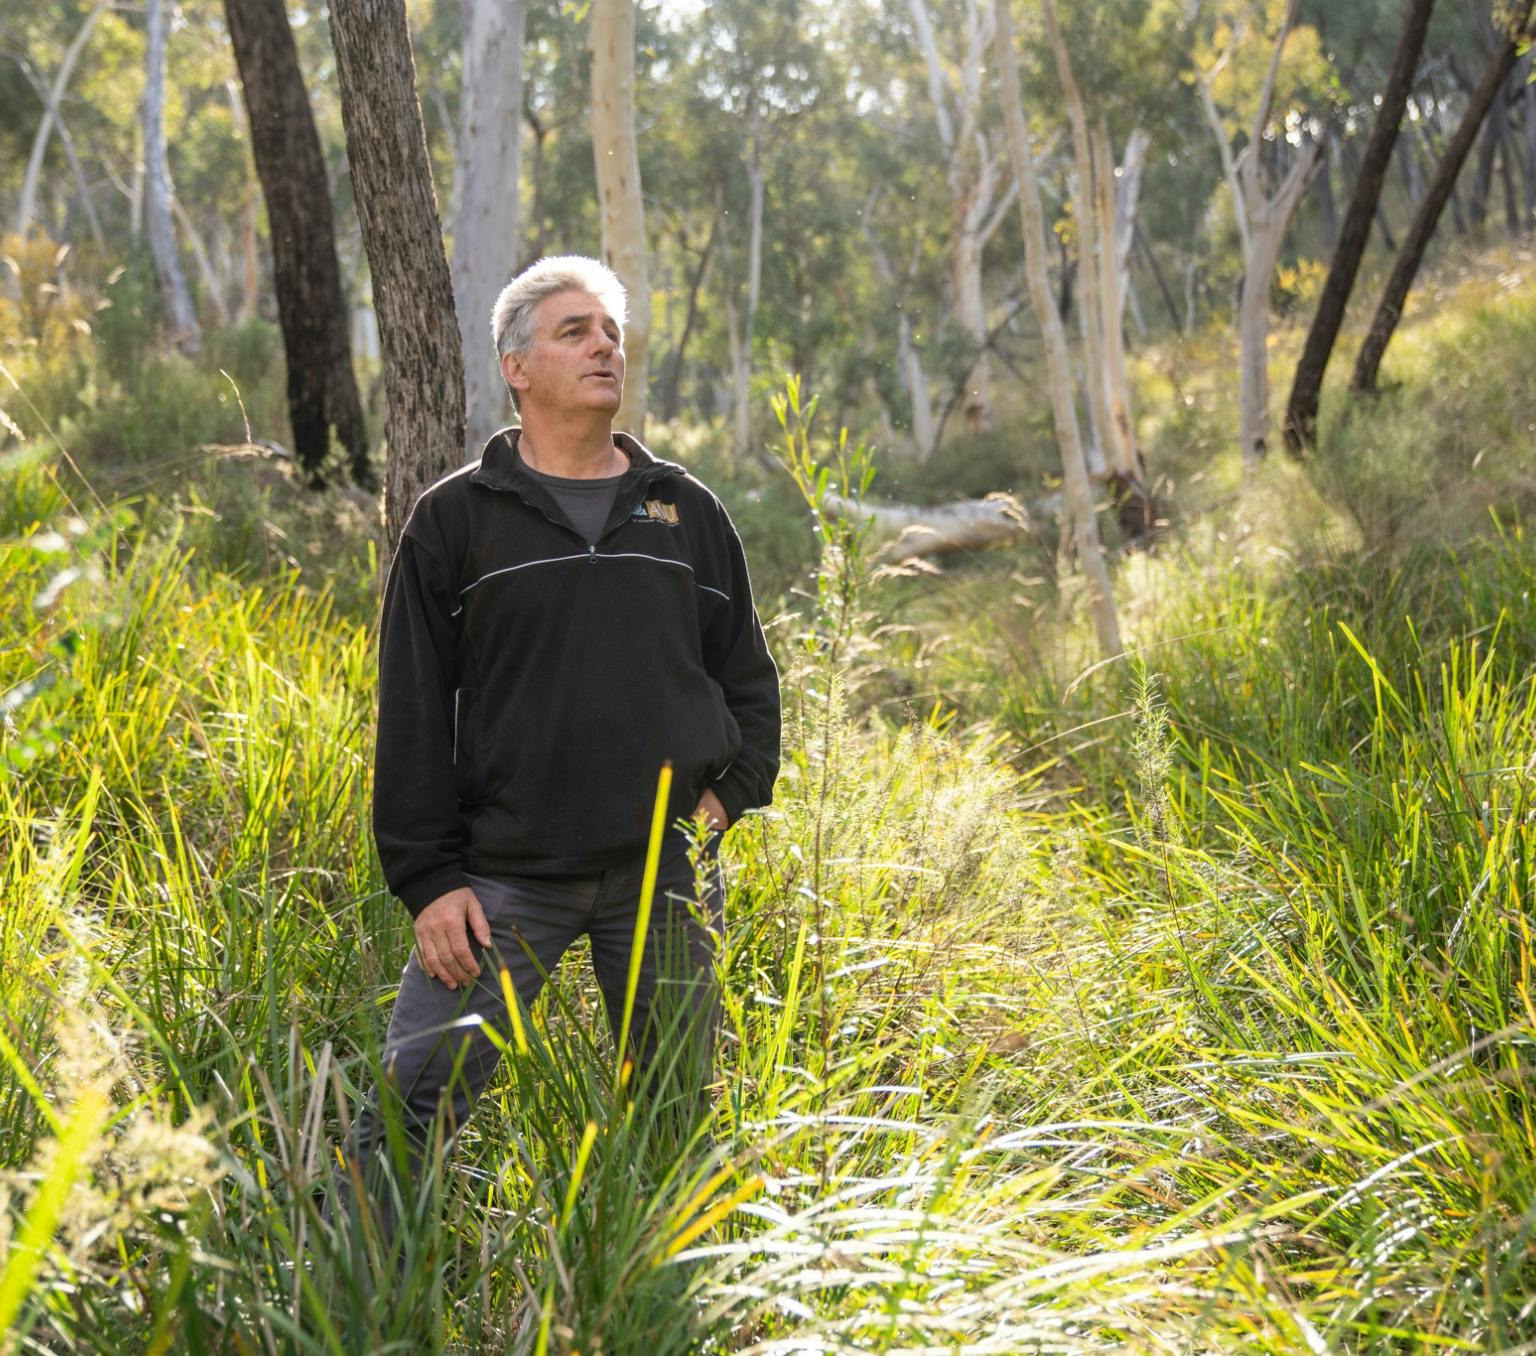 Professor David Lindenmayer from ANU surrounded by trees and tall grass